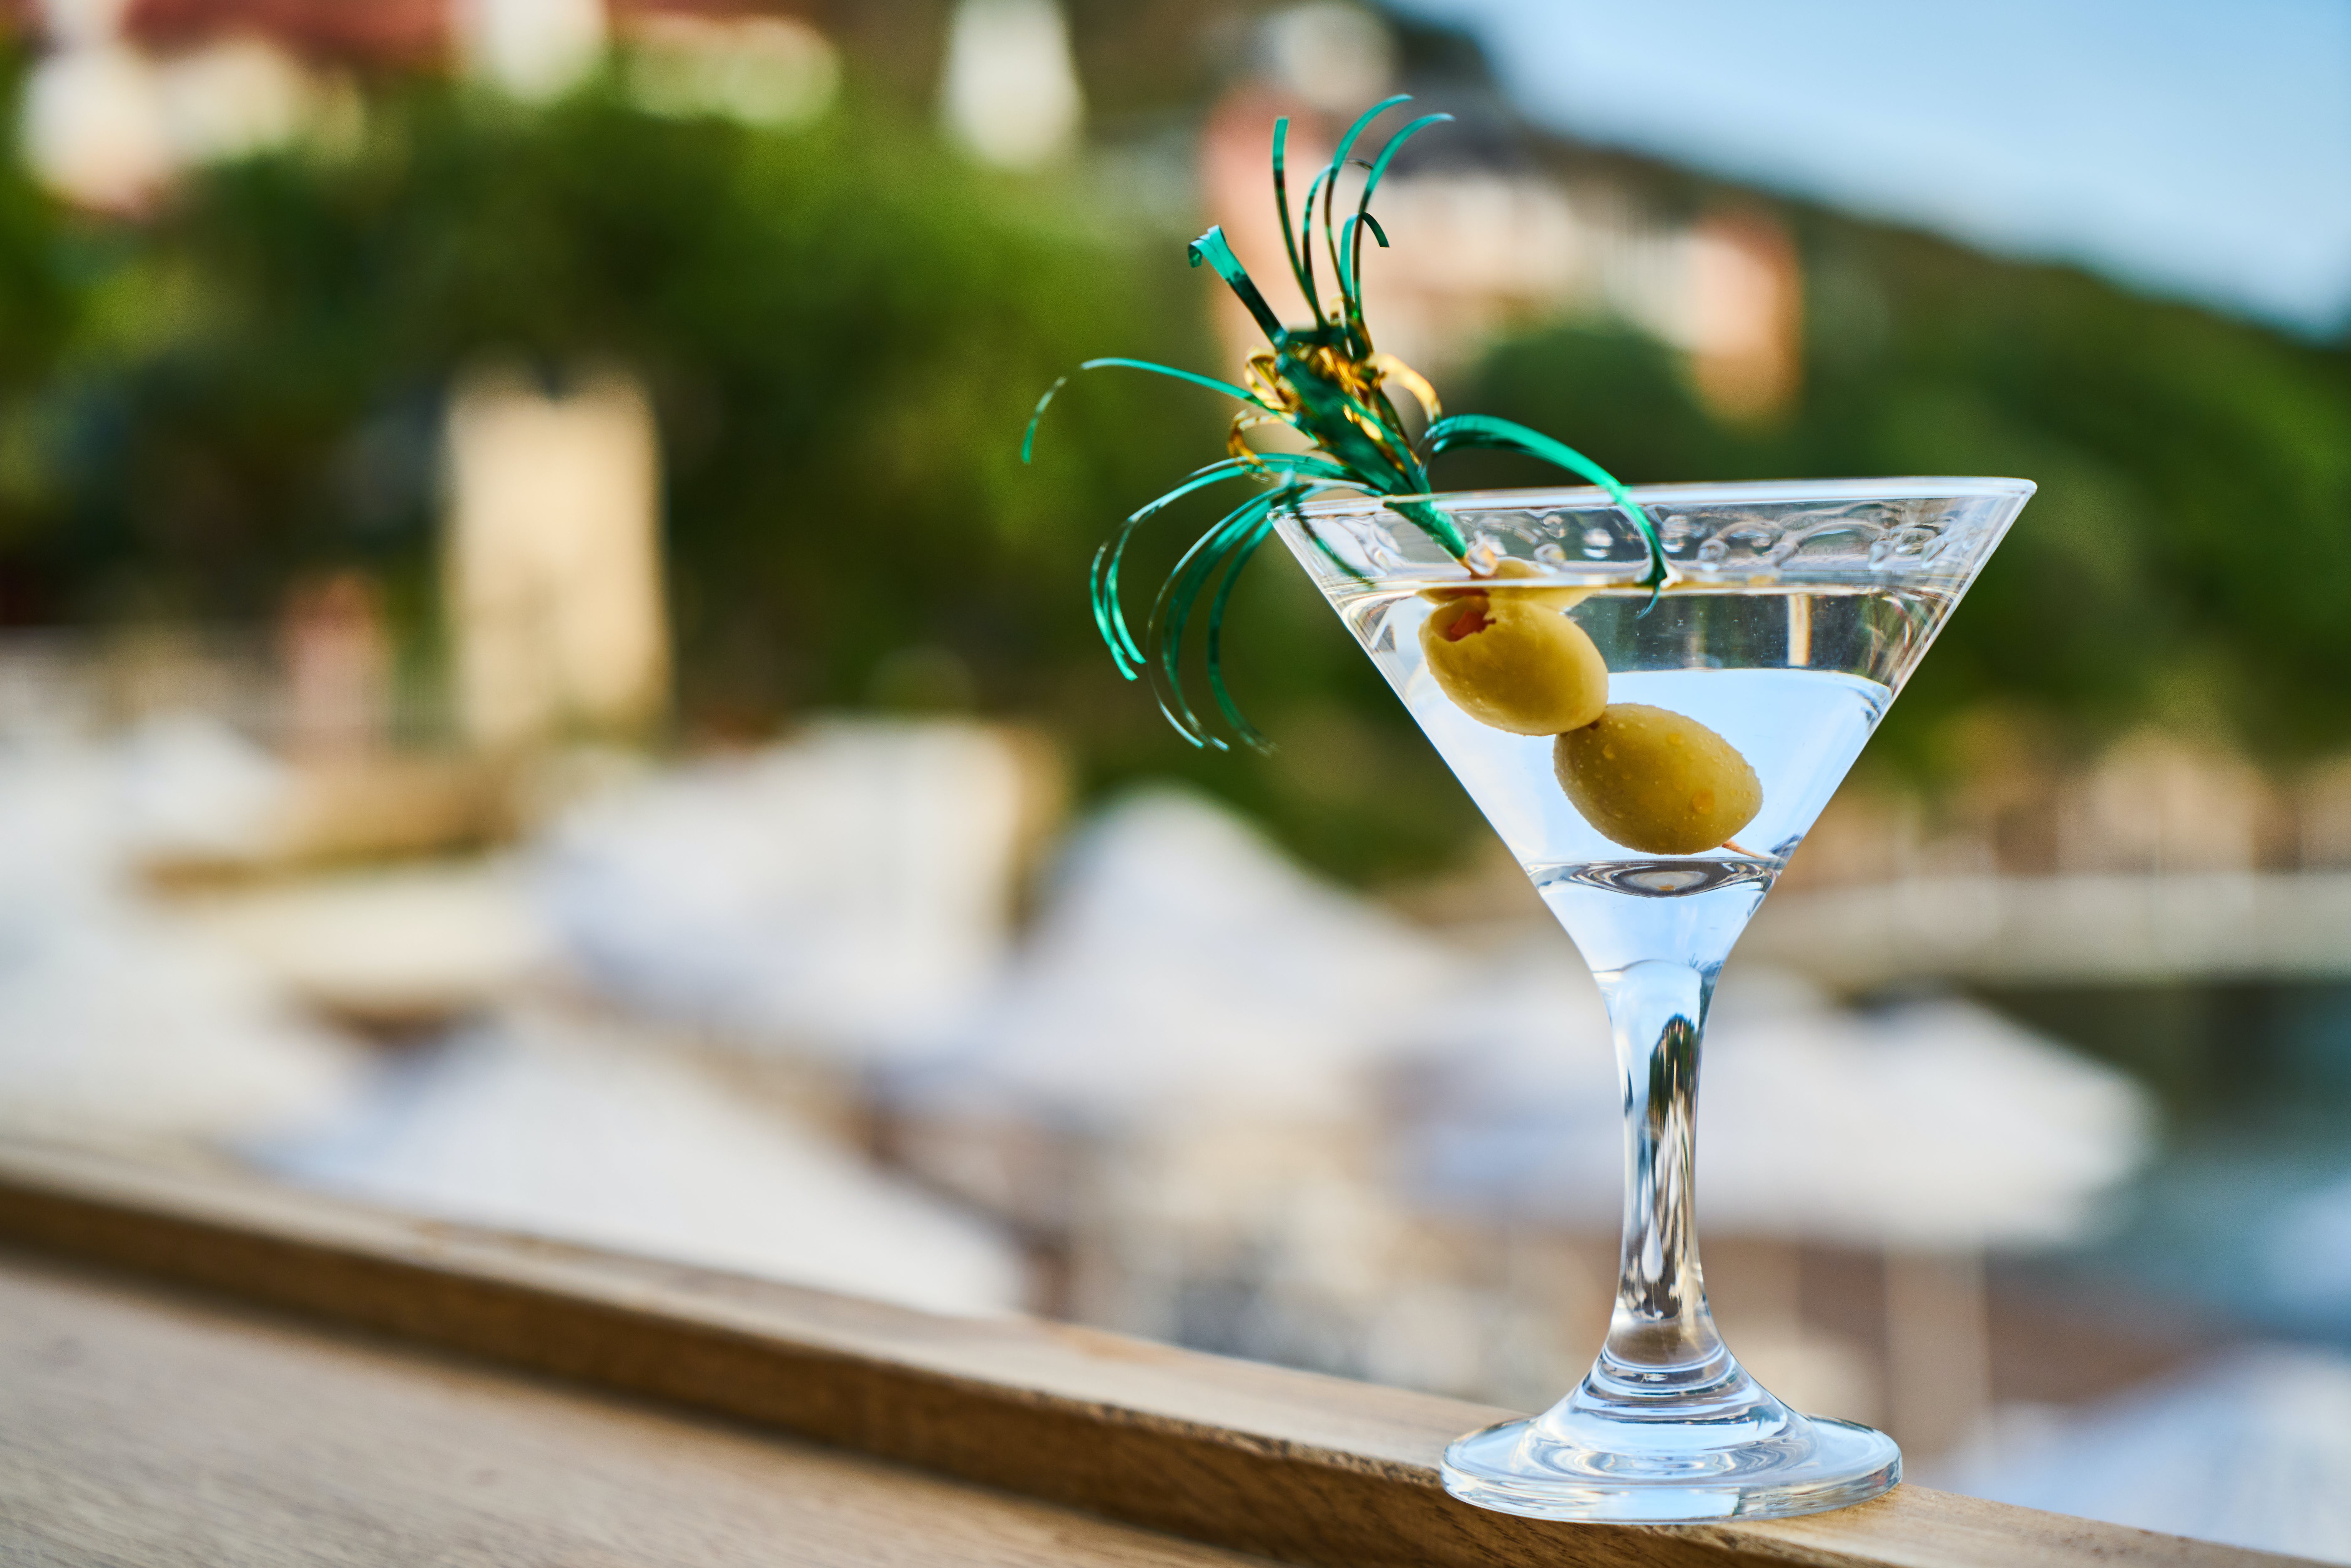 Your Ultimate Reverse Martini Guide: Ingredients, Ratios and Garnishes